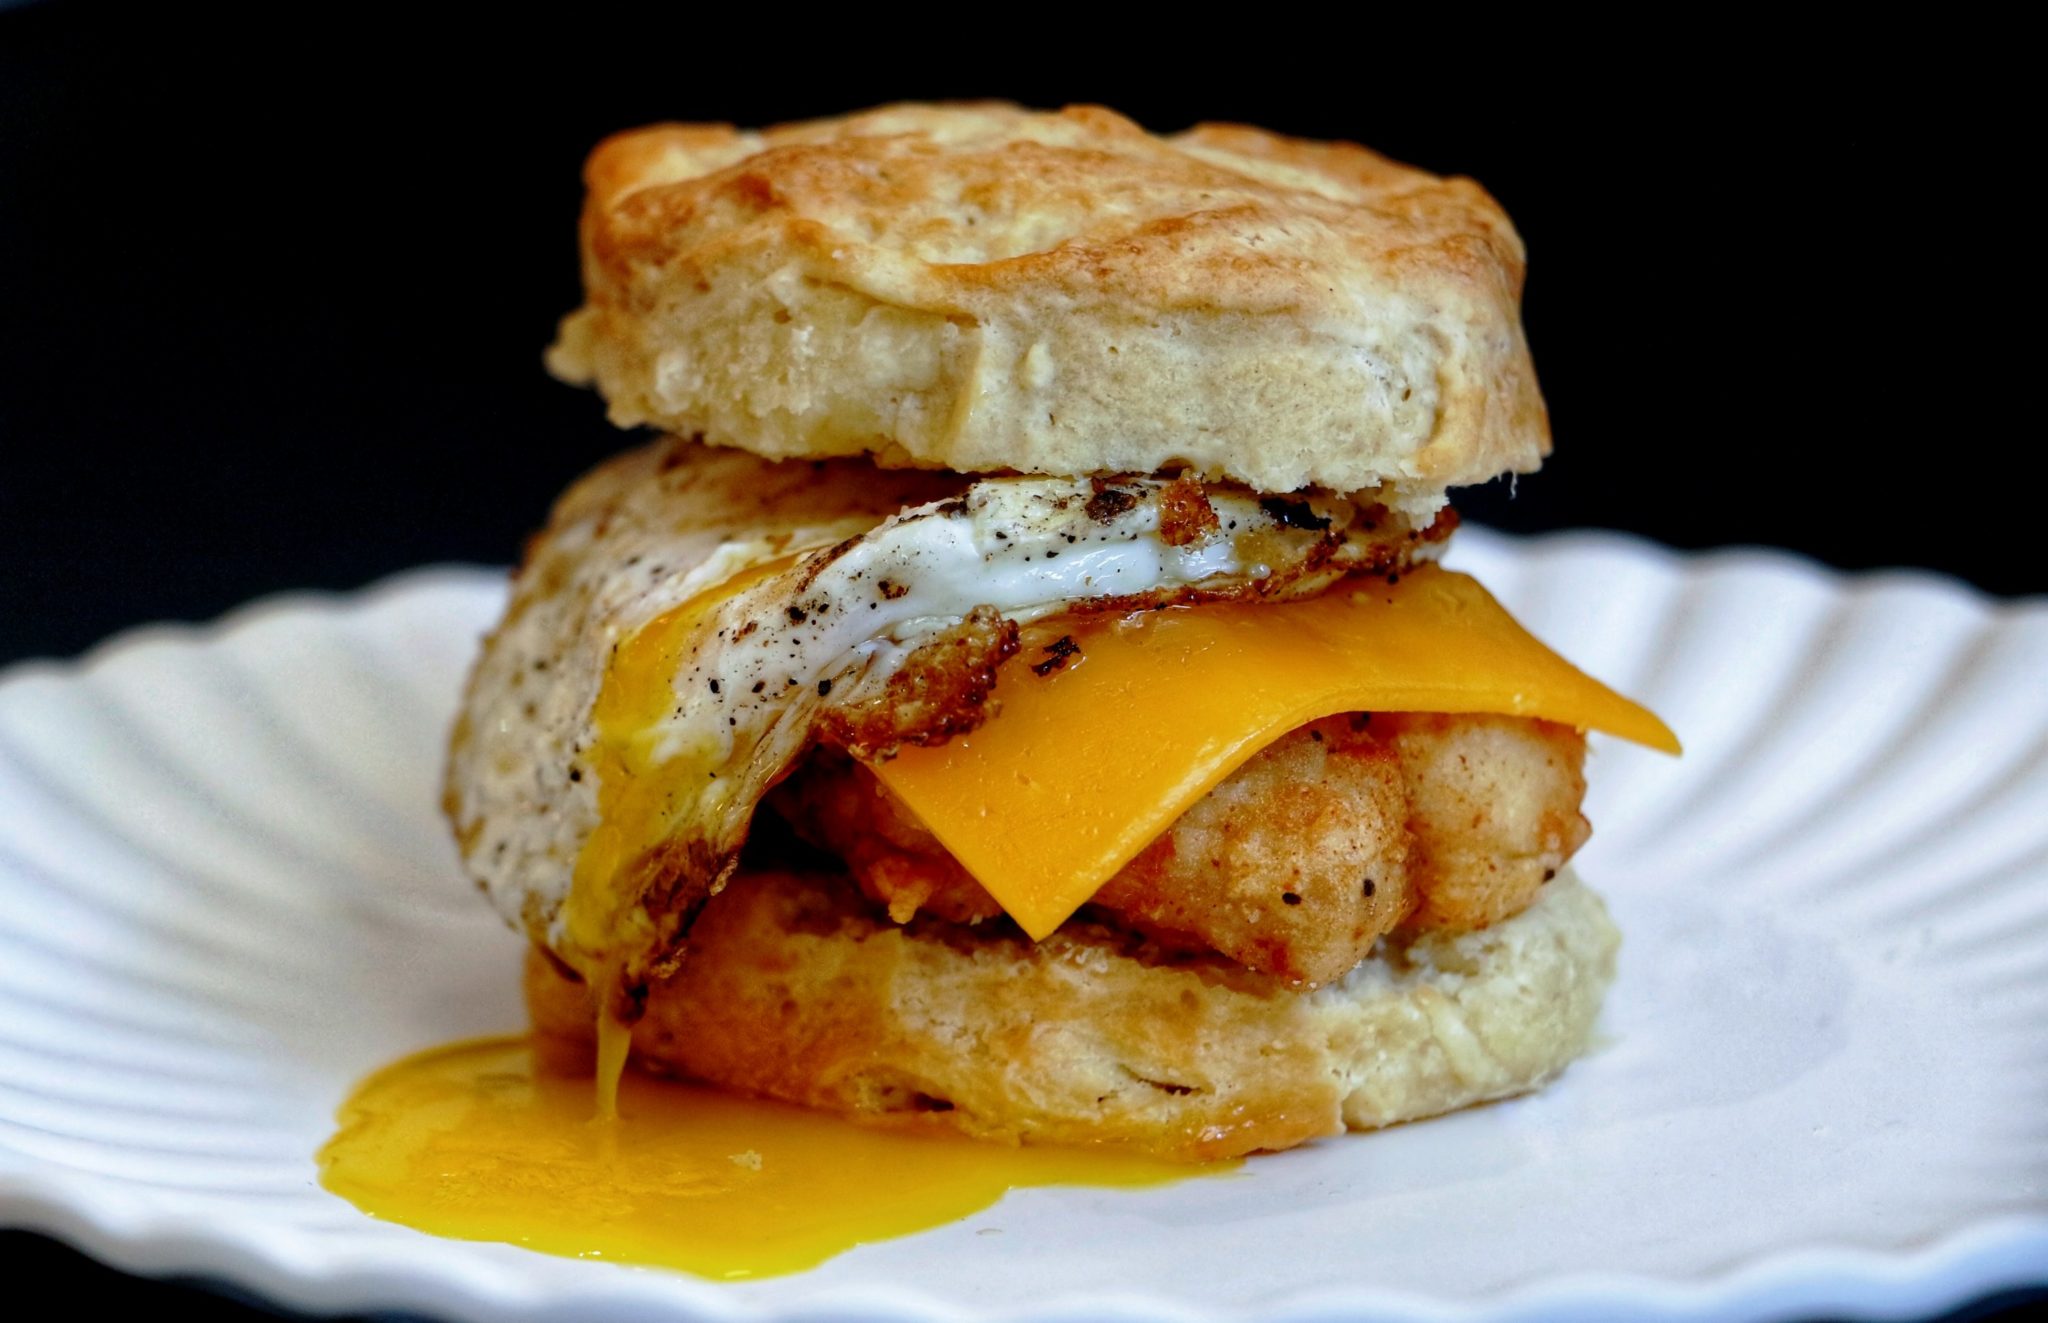 Breakfast biscuit at Mason Dixie Biscuit Co. Photograph by Jai Williams.